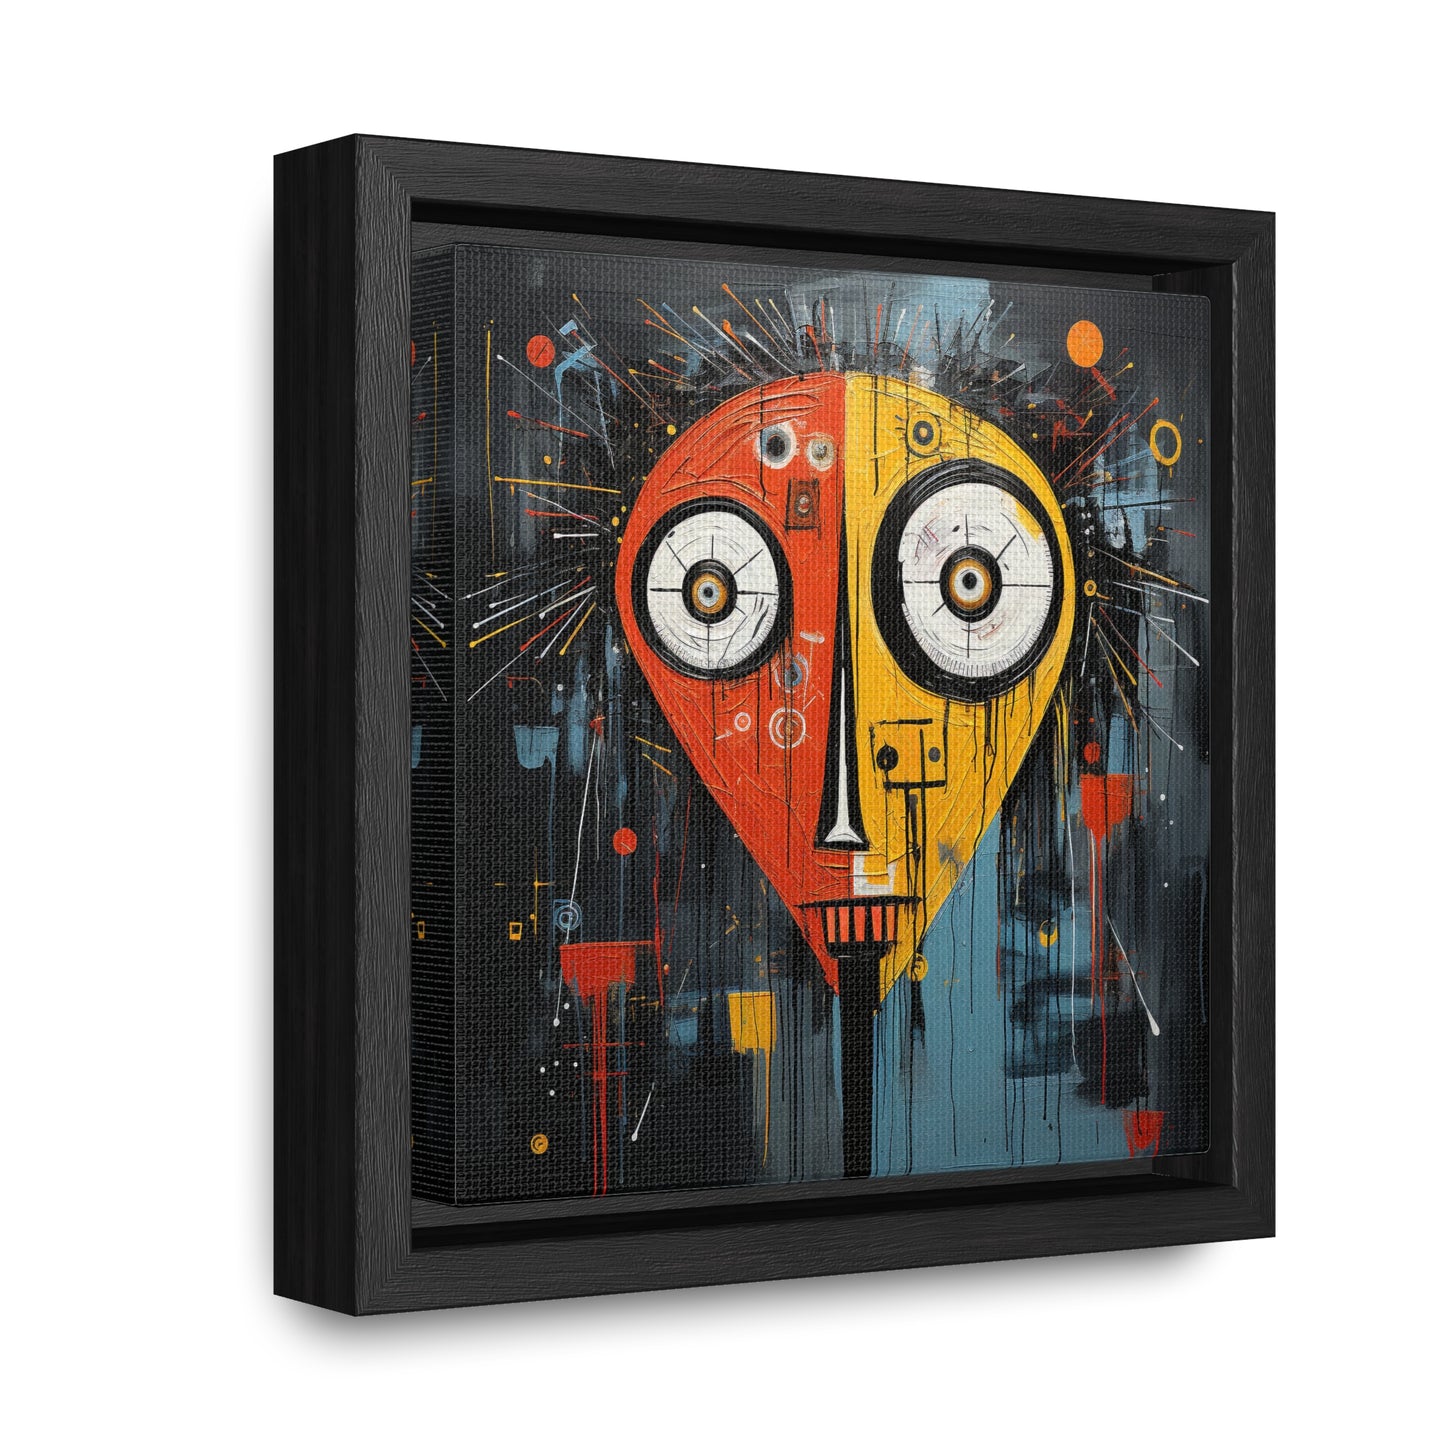 Noel 4, Gallery Canvas Wraps, Square Frame